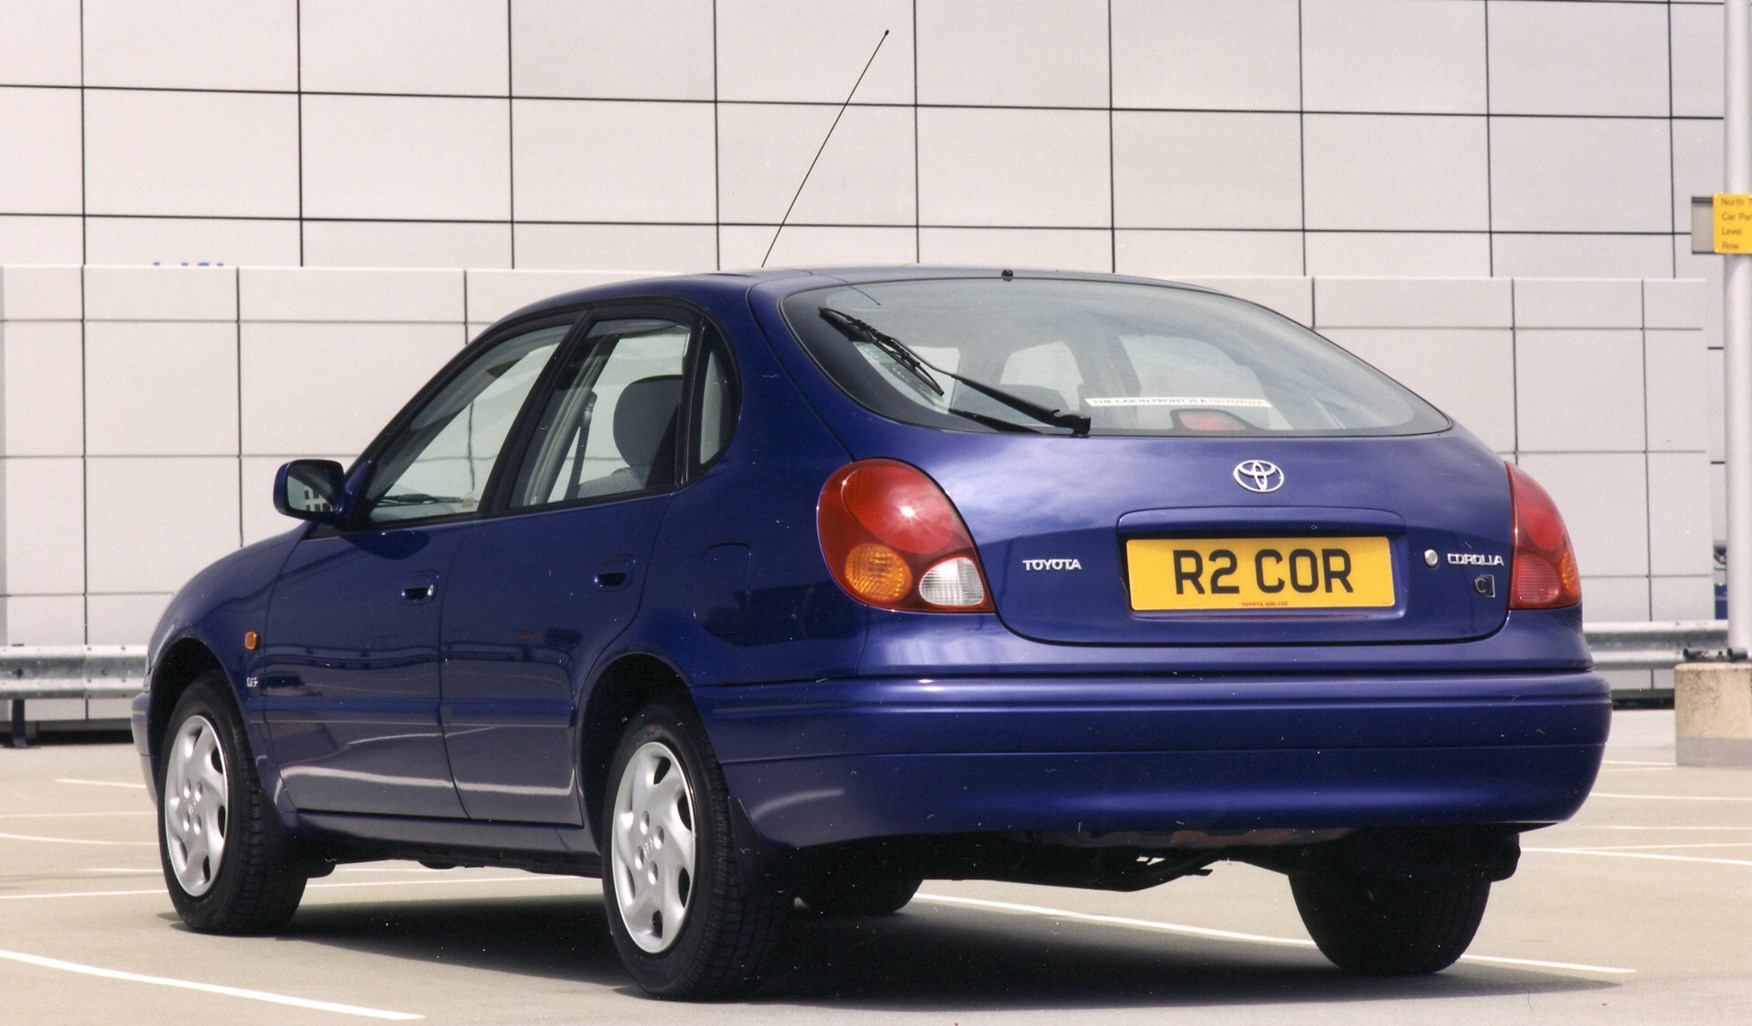 Toyota Corolla Hatchback (1997 - 2000) Photos | Parkers